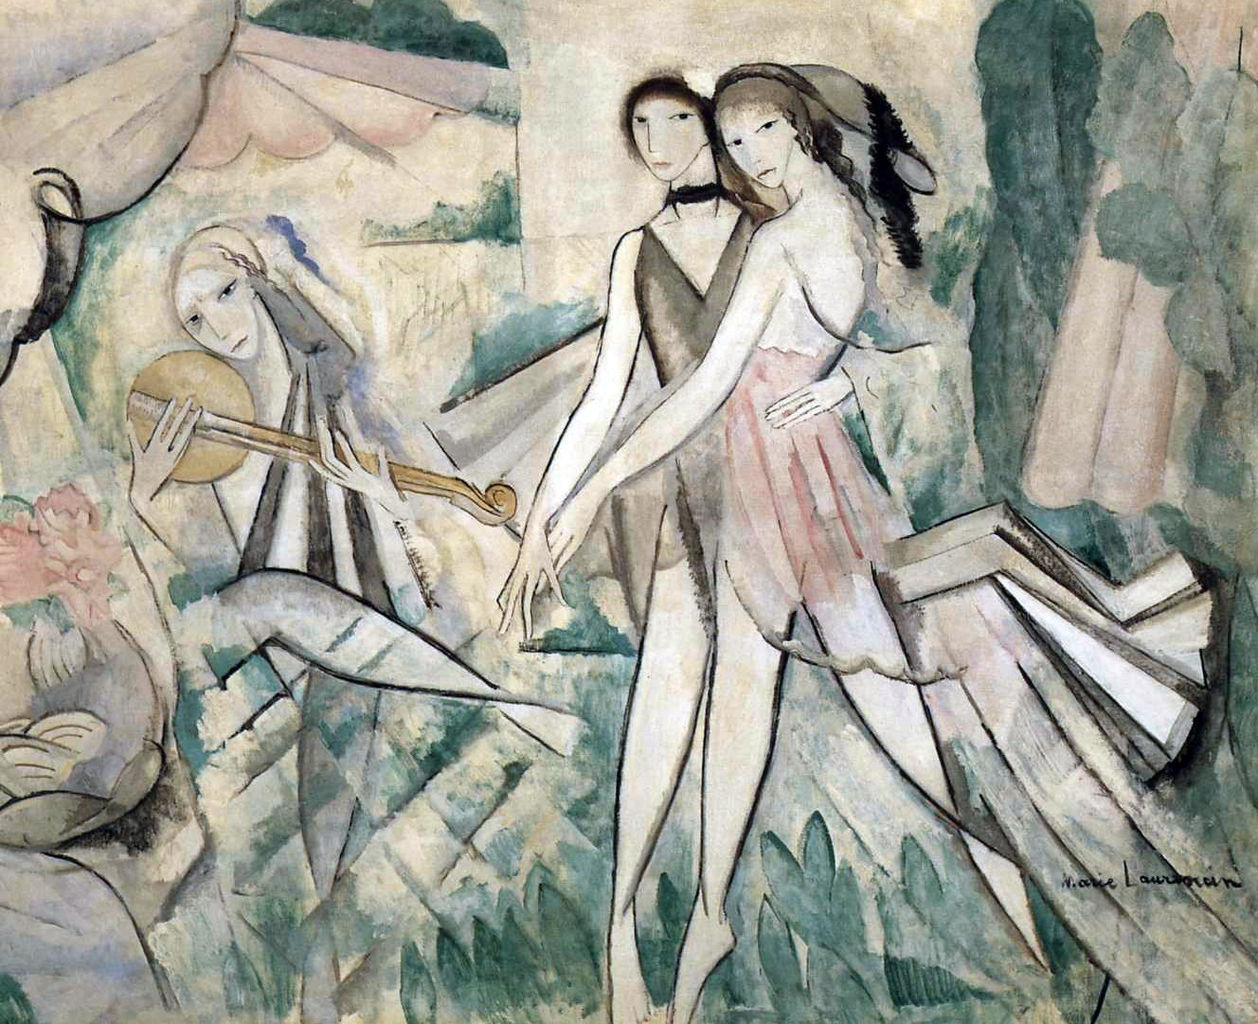 Oil painting of 2 women dancing while a third plays an instrument. The elongated shapes and the muted colors make it dreamy.